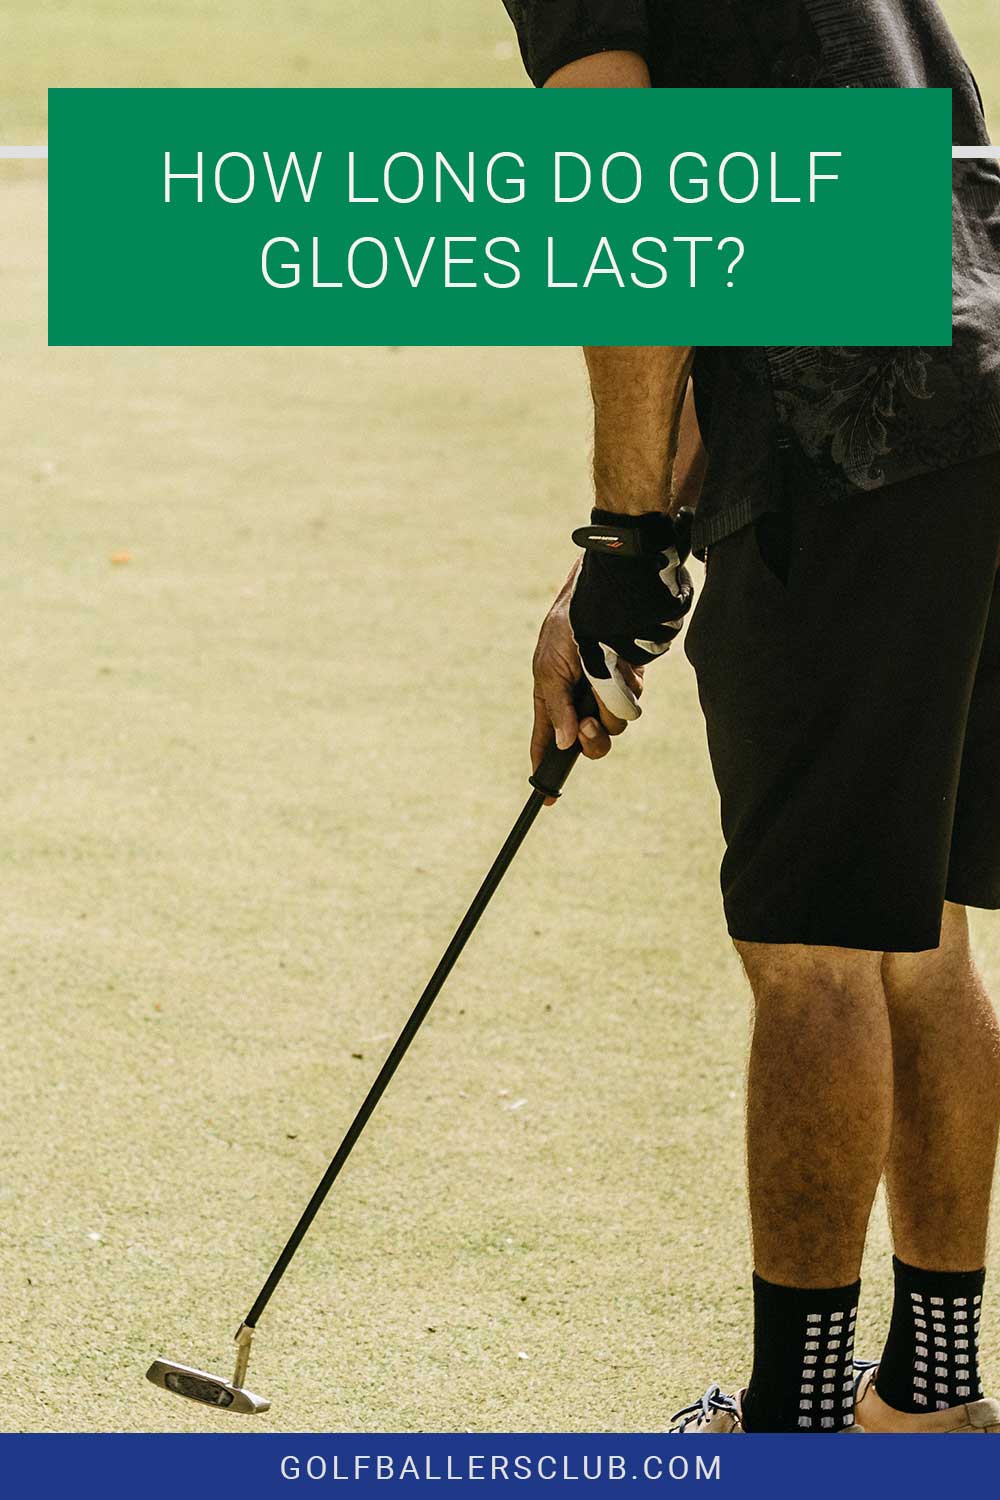 Person wearing a golf glove and black shorts taking a shot - How Long Do Golf Gloves Last?